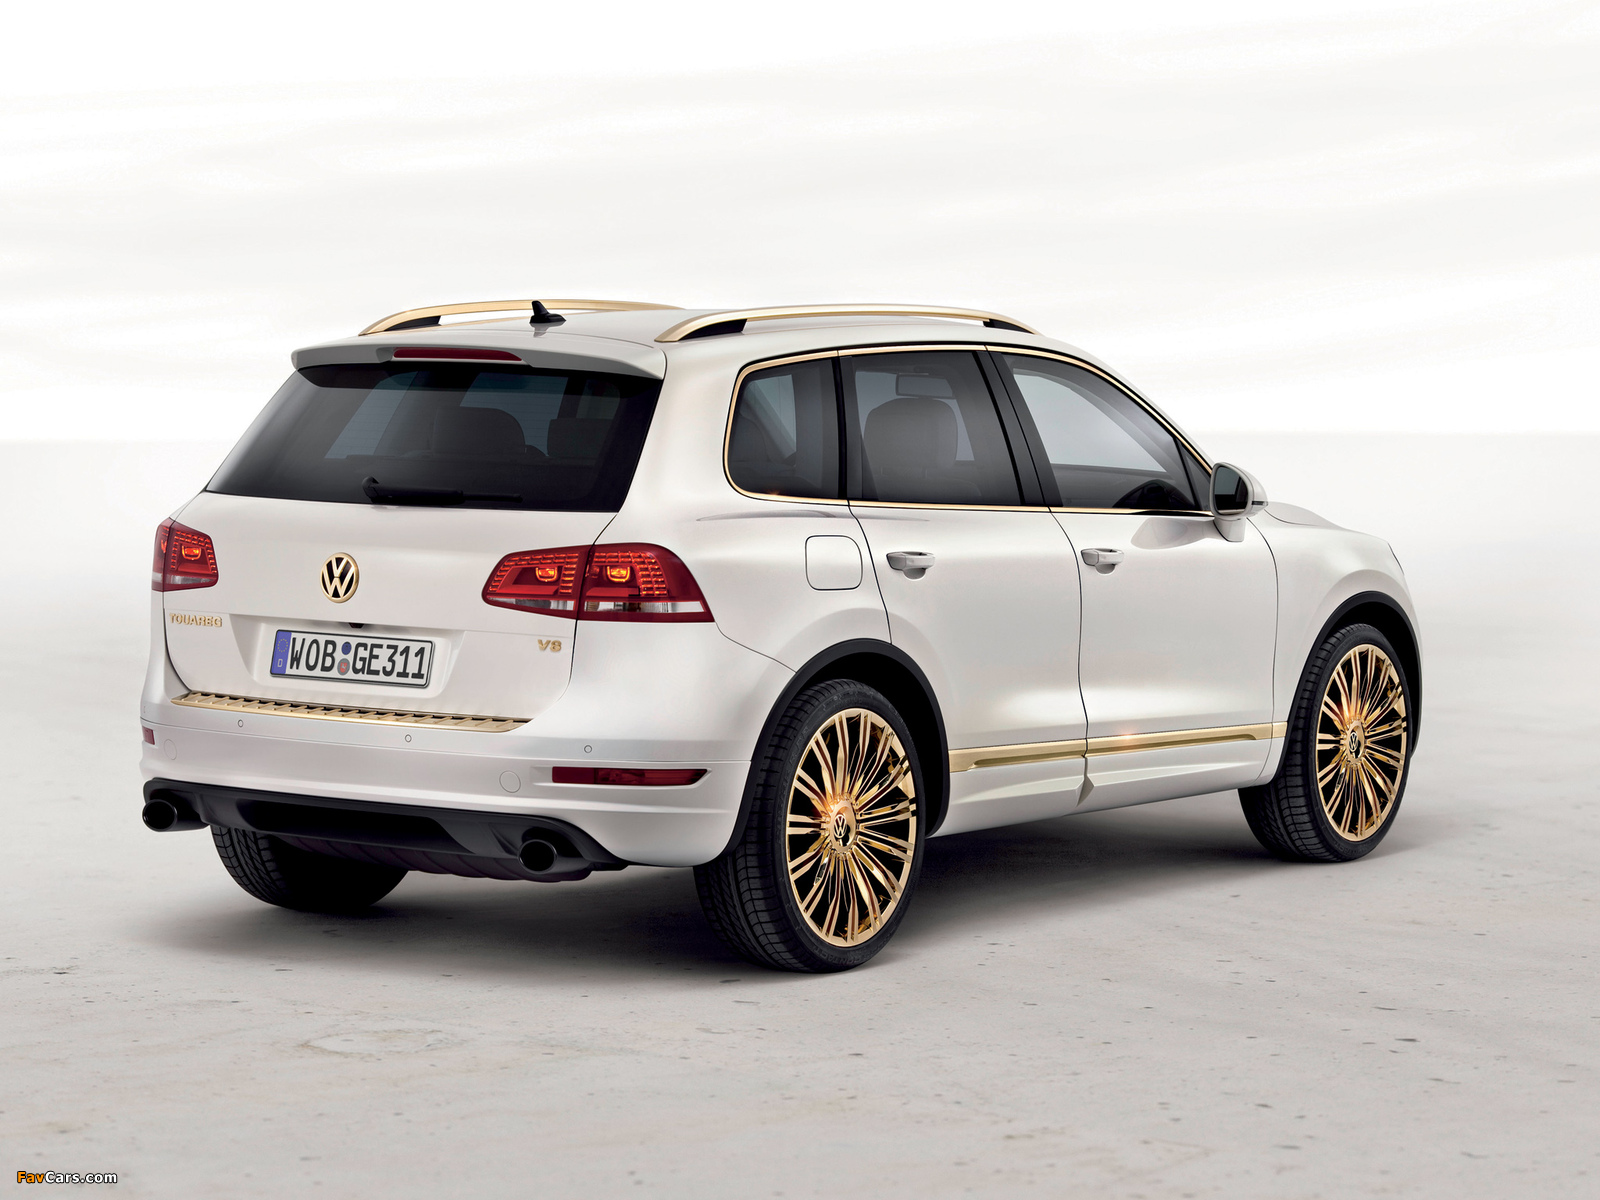 Volkswagen Touareg V8 TDI Gold Edition Concept 2011 pictures (1600 x 1200)